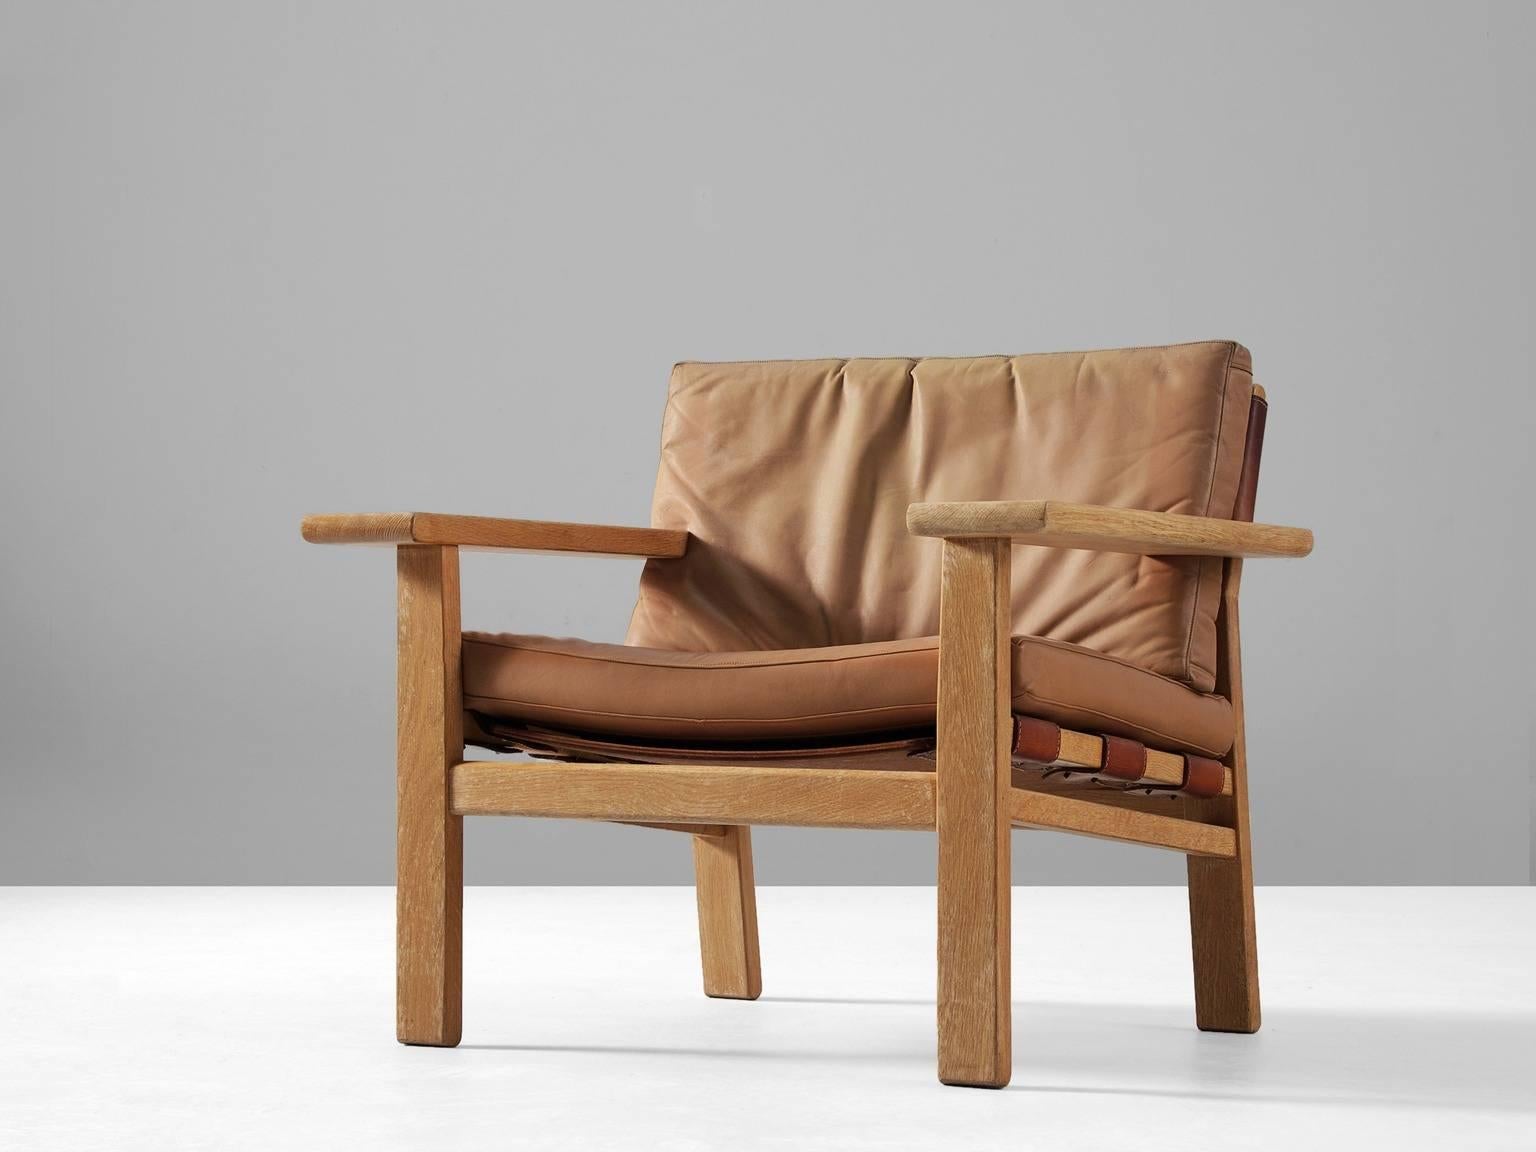 Armchair, in oak and leather, by Kurt Ostervig for K.P. Møbler, Denmark 1950s. 

Sturdy armchair in solid oak and saddle leather. This design of Ostervig has a strong resemblance to the Spanish chair of Børge Mogensen. Yet the design of this